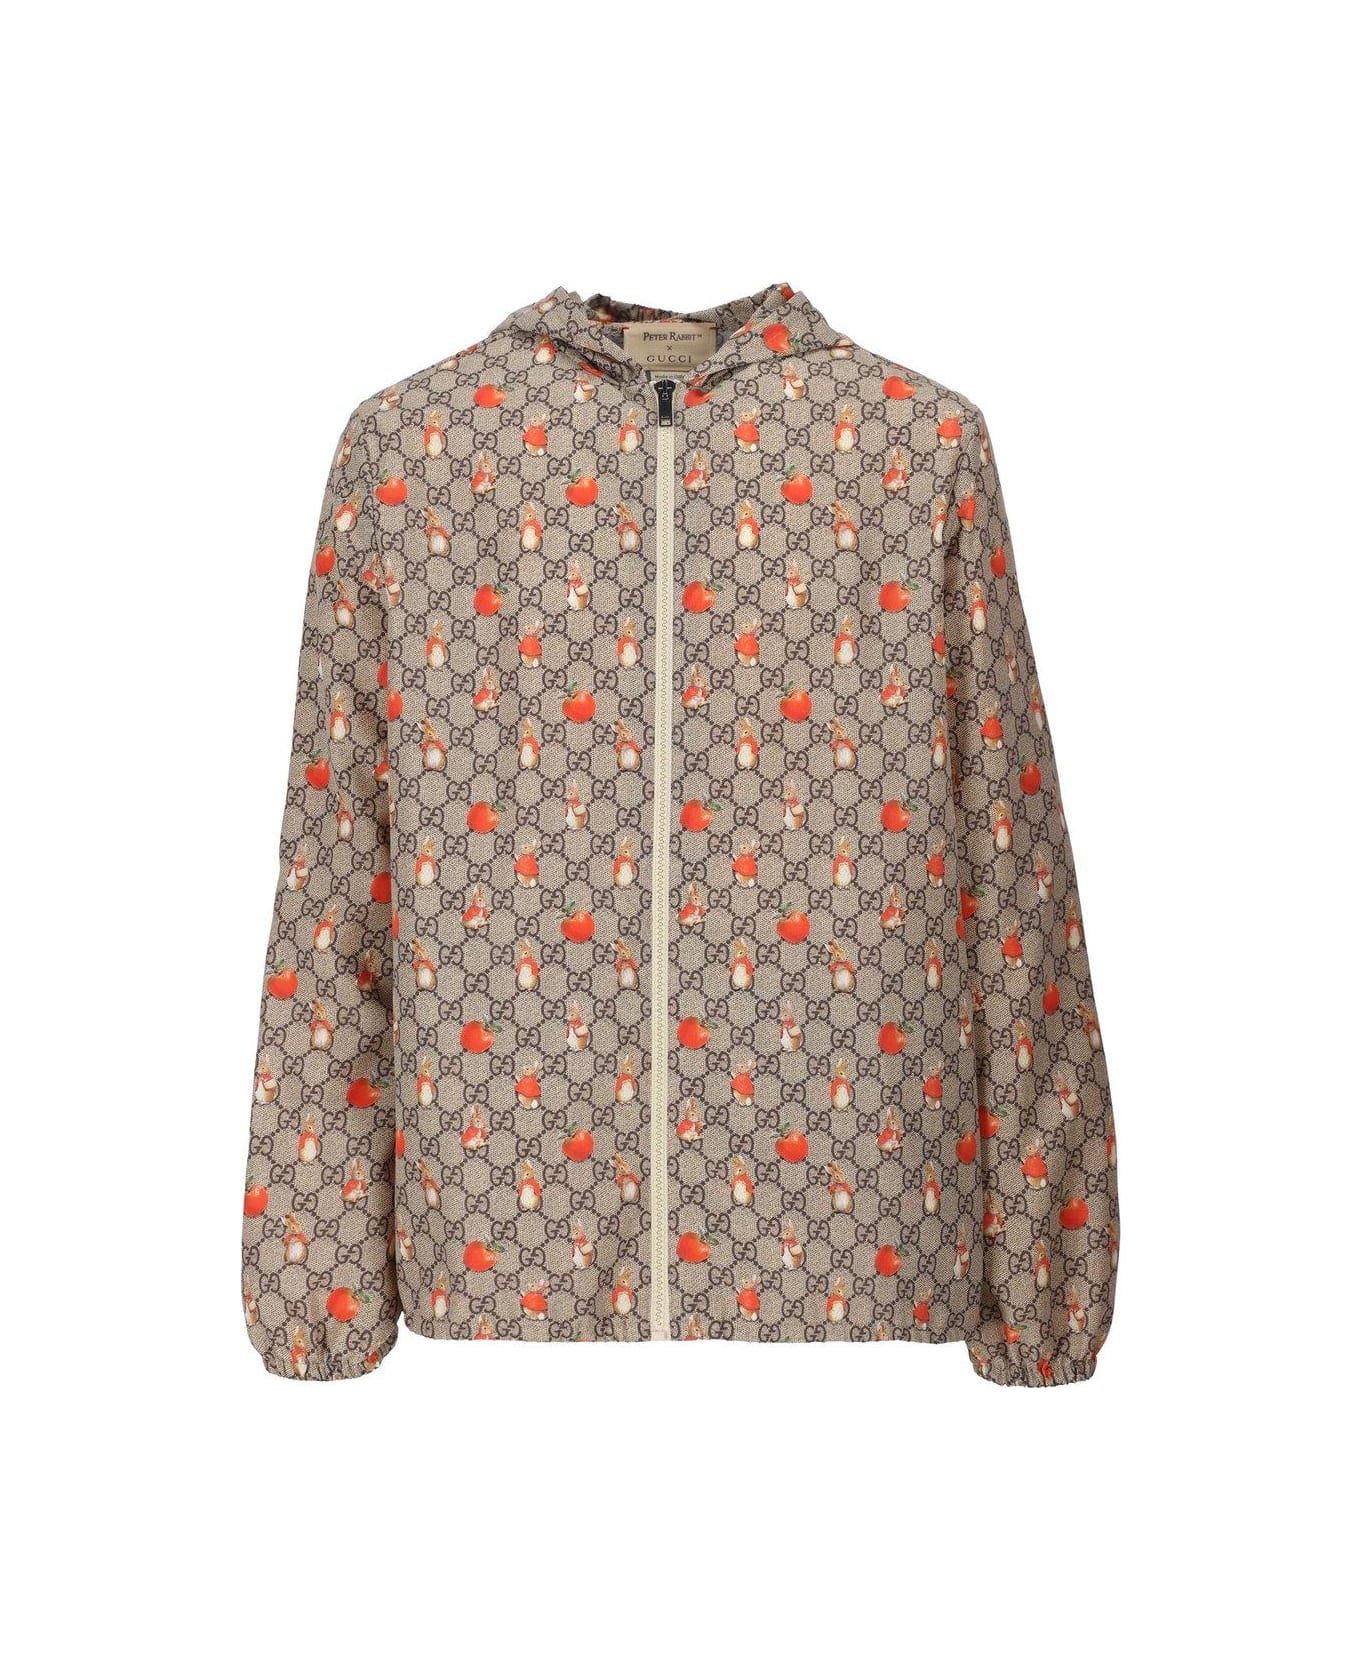 Gucci Allover Printed Hooded Jacket コート＆ジャケット